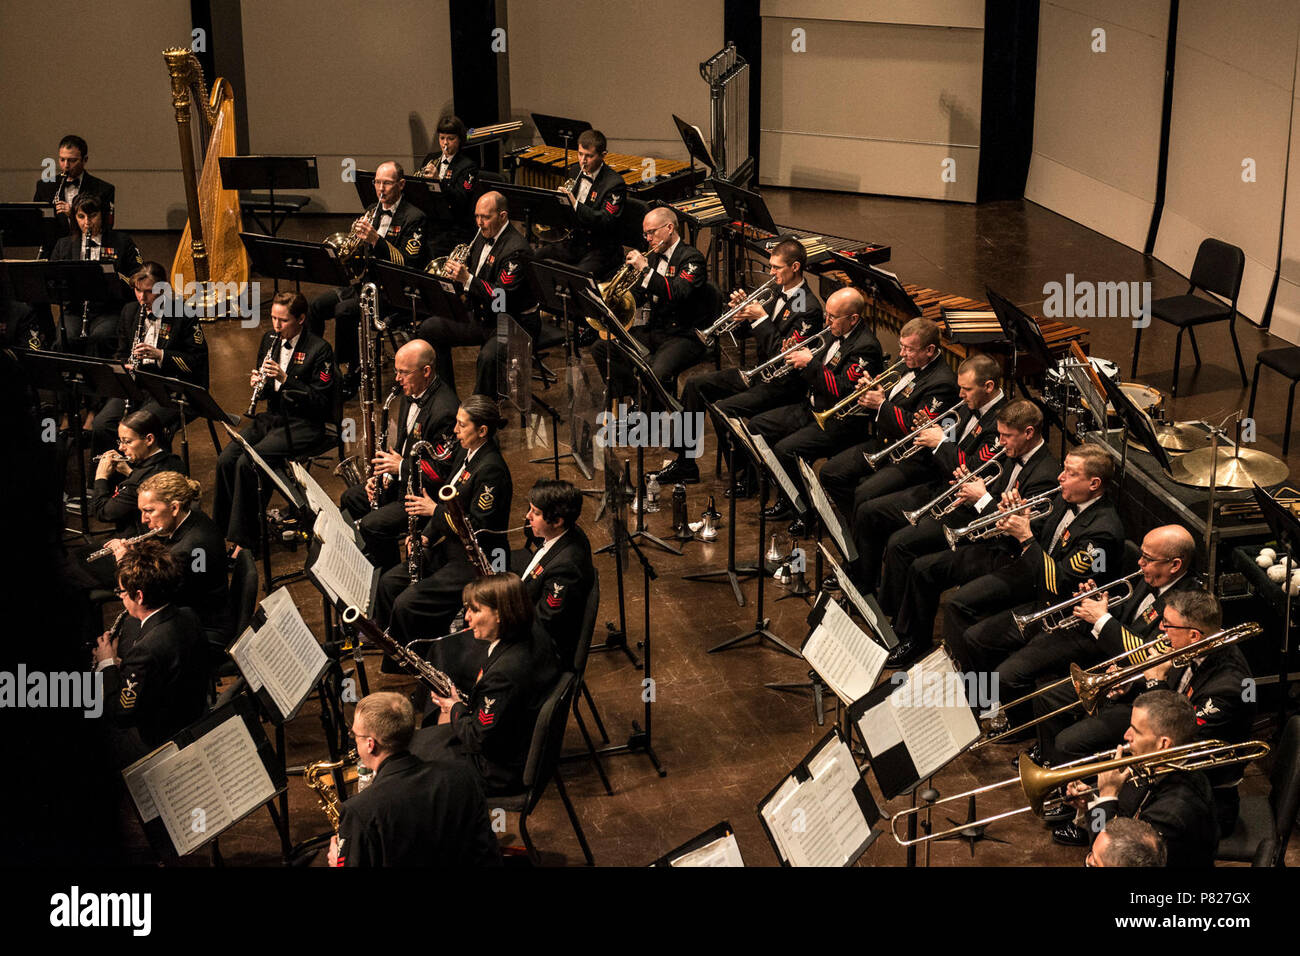 AMHERST, MASS (Mar. 6, 2016) Musicians of the U.S. Navy Band perform at the University of Massachussetts Fine Arts Center in Amherst, Mass. The U.S. Navy Band is on a 25-day tour of the northeastern United States. Stock Photo